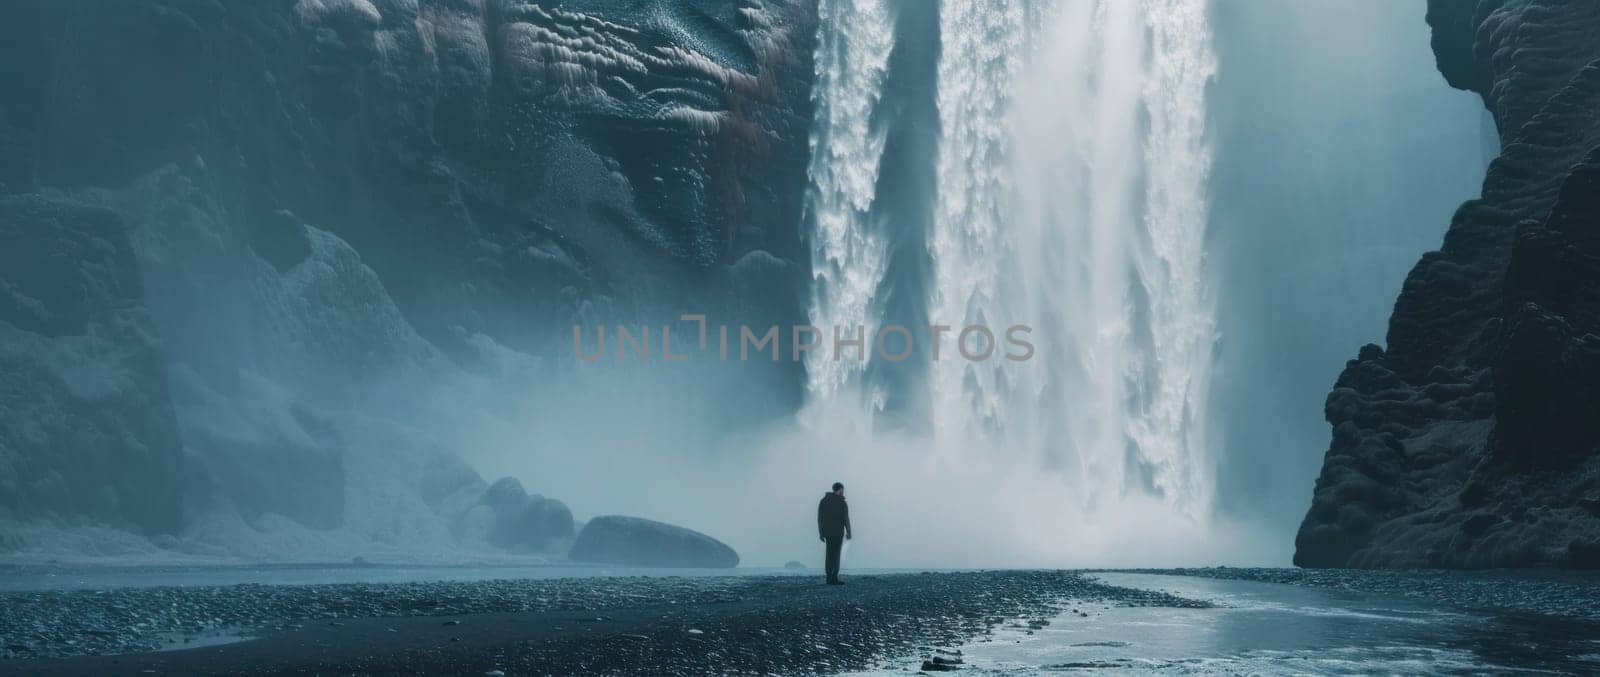 Adventurous man standing in front of majestic waterfall surrounded by nature and rocky terrain for travel and exploration concept by Vichizh